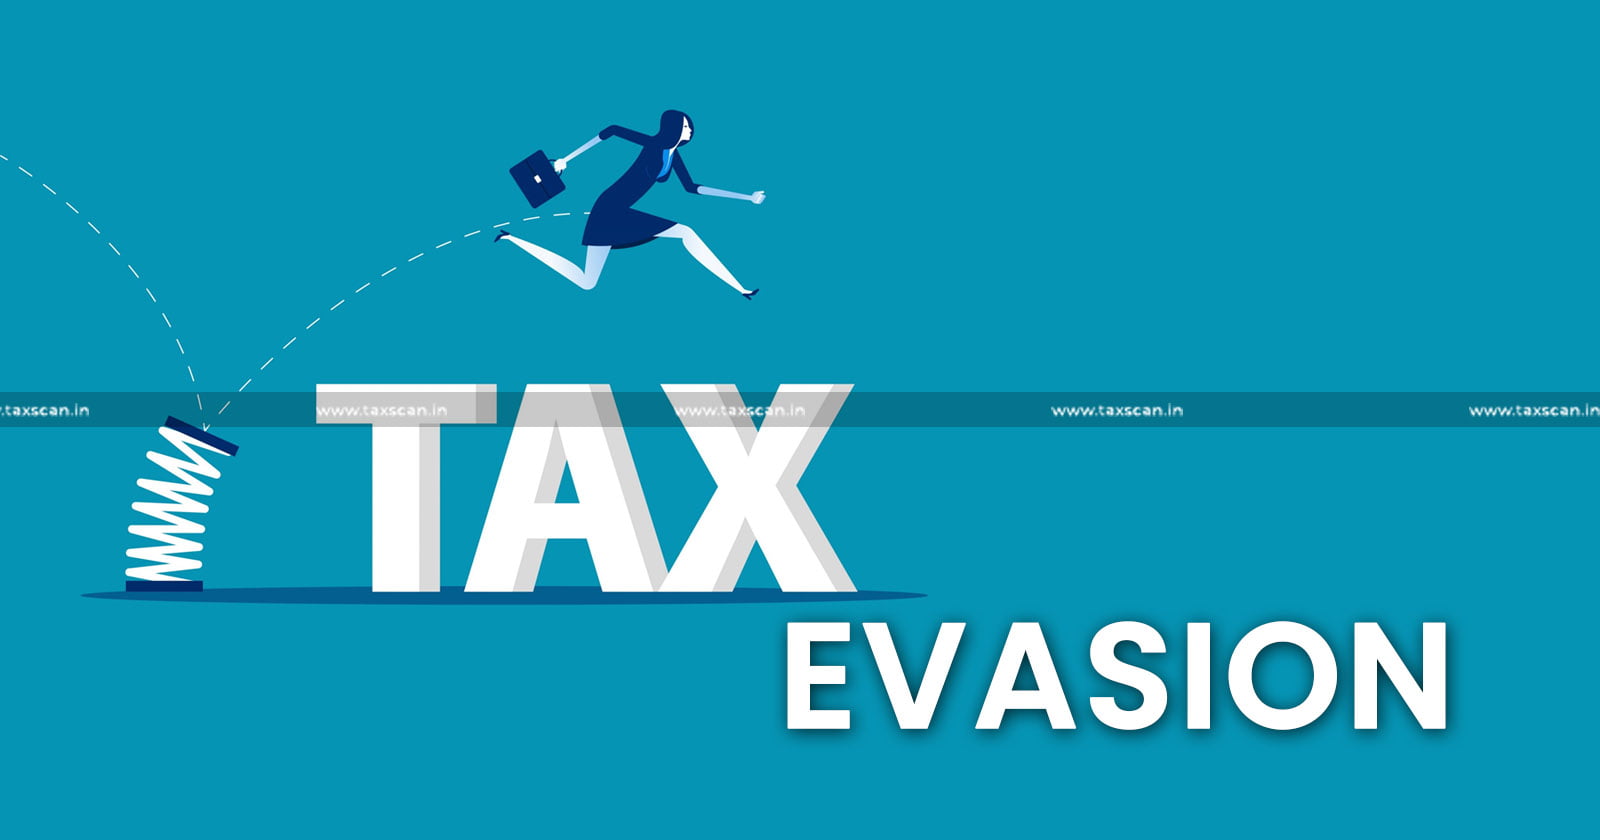 Service Tax - Penalty in Absence of Intention to Evade Tax - Penalty - CESTAT news - CESTAT - taxscan